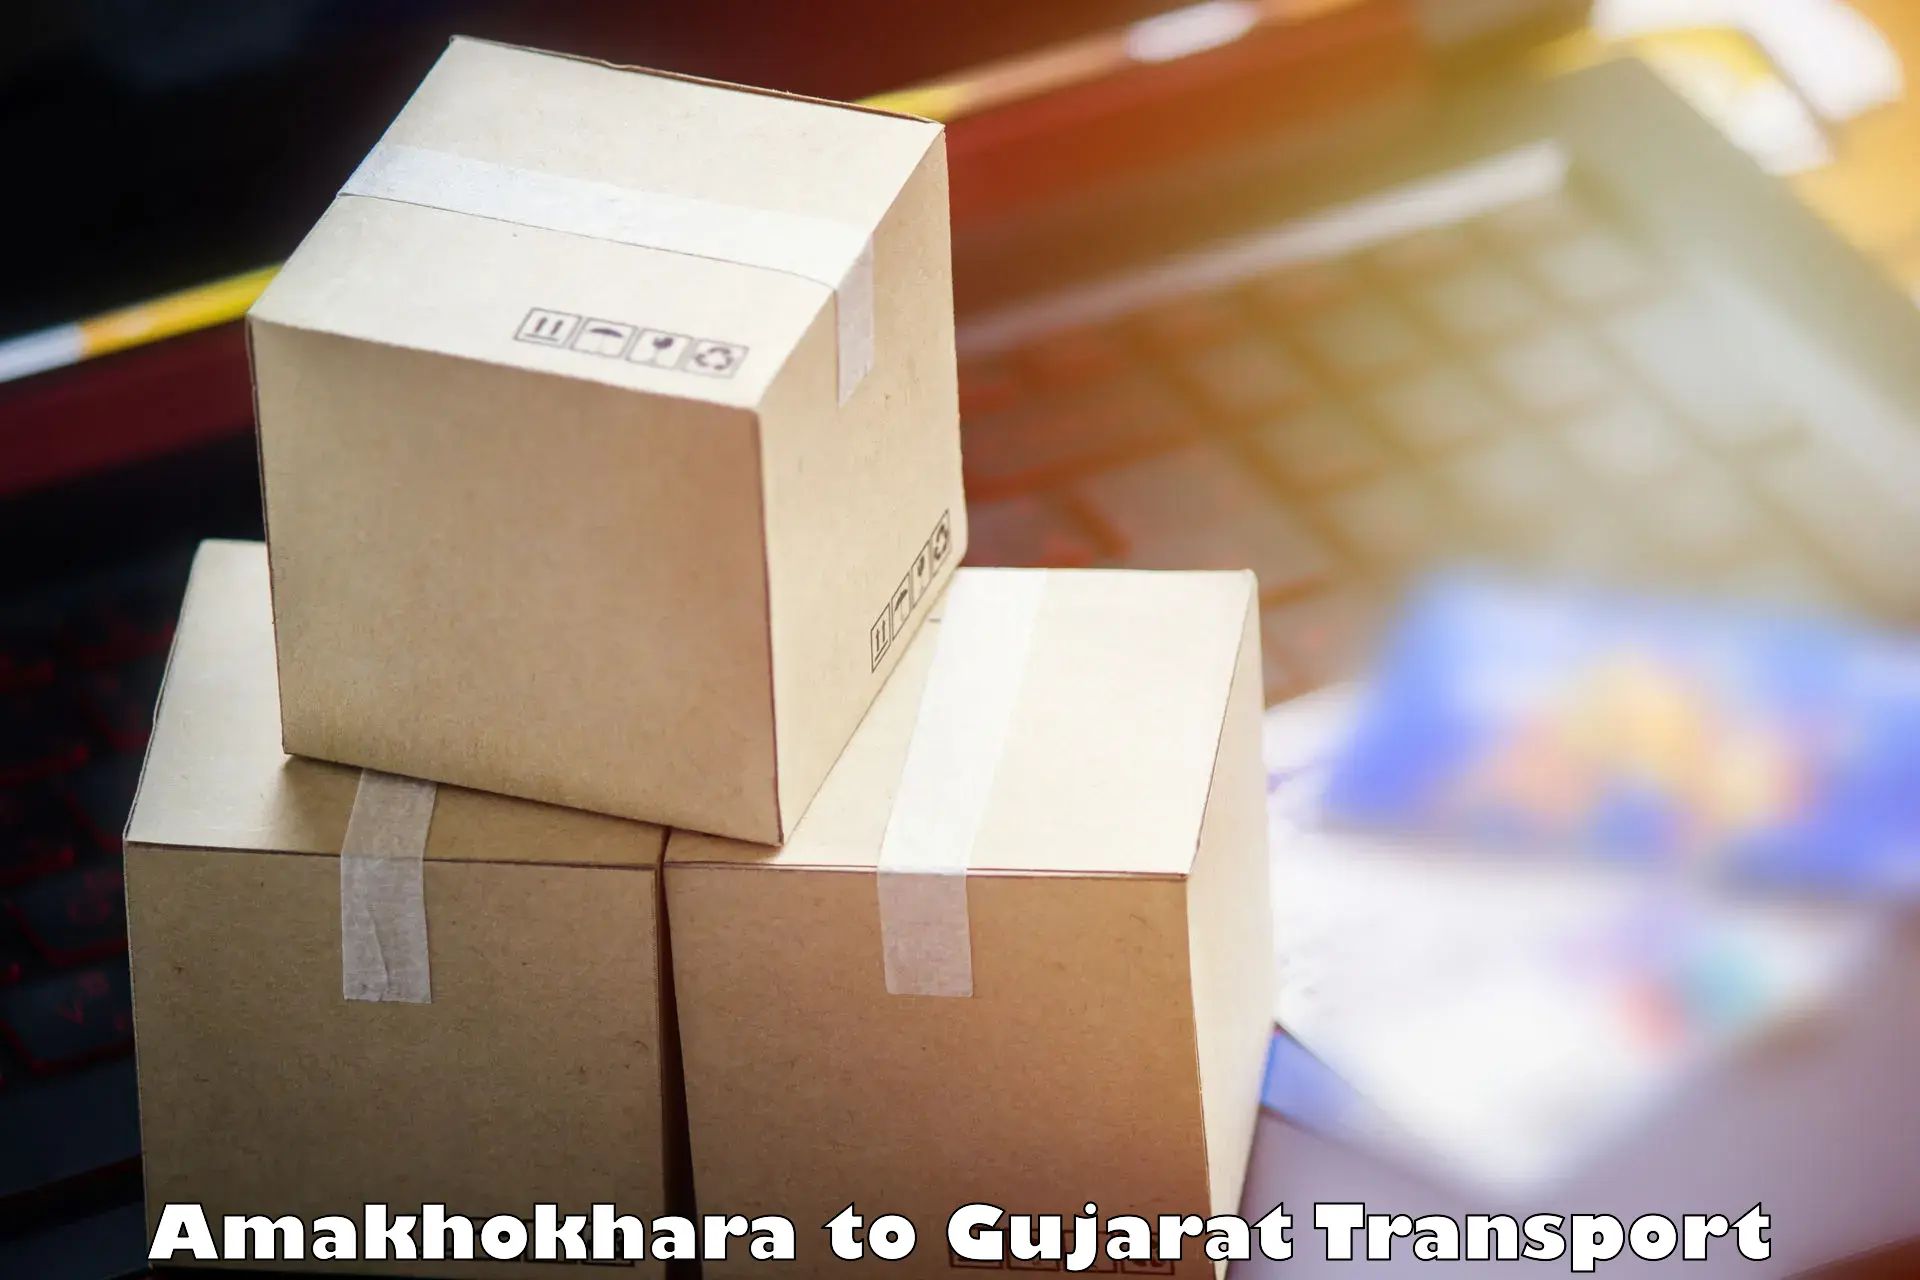 Package delivery services Amakhokhara to Vatadara